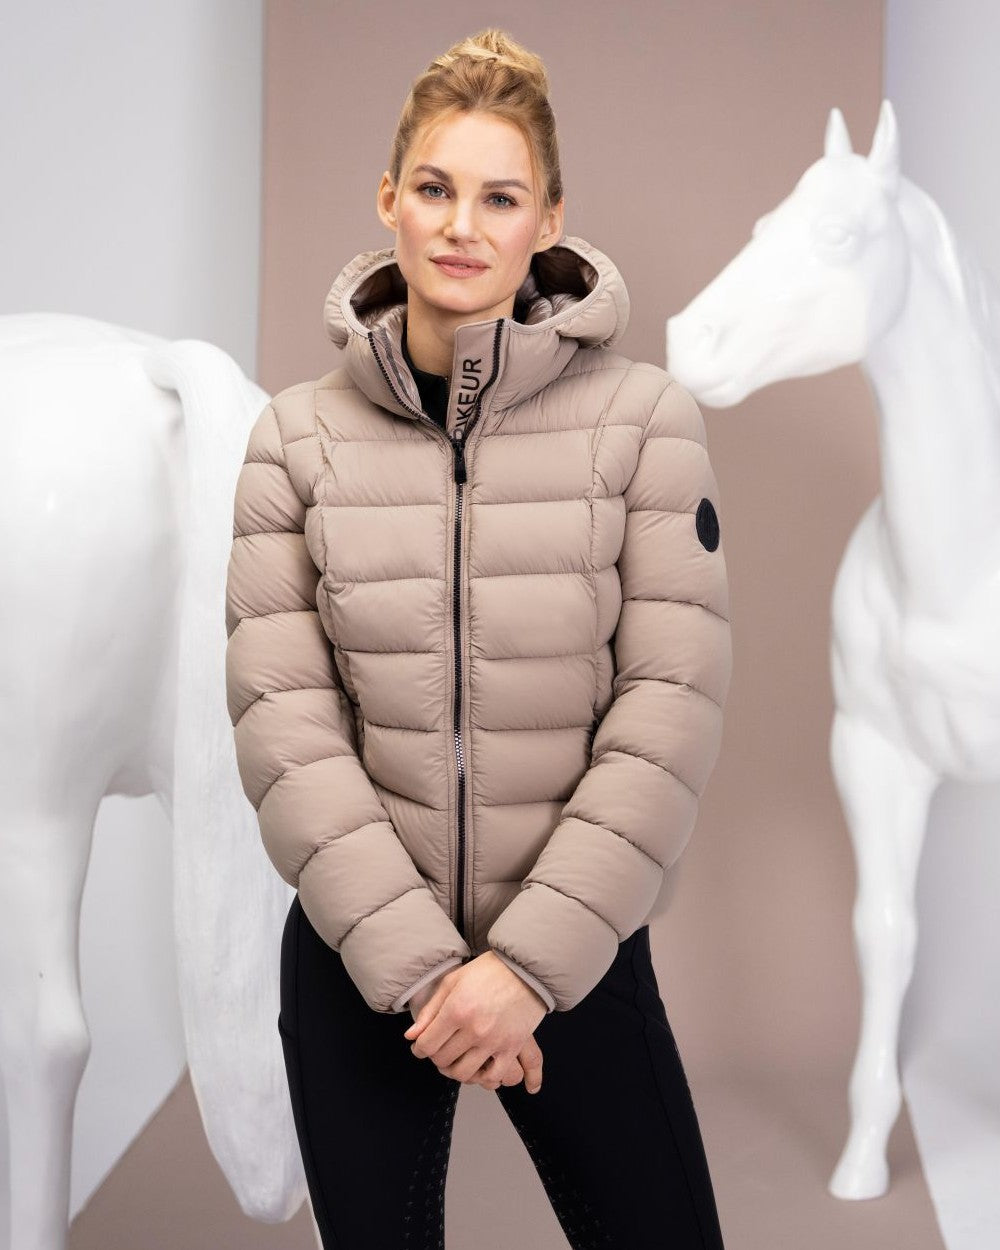 Pikeur Quilted Jacket in Desert Sand 